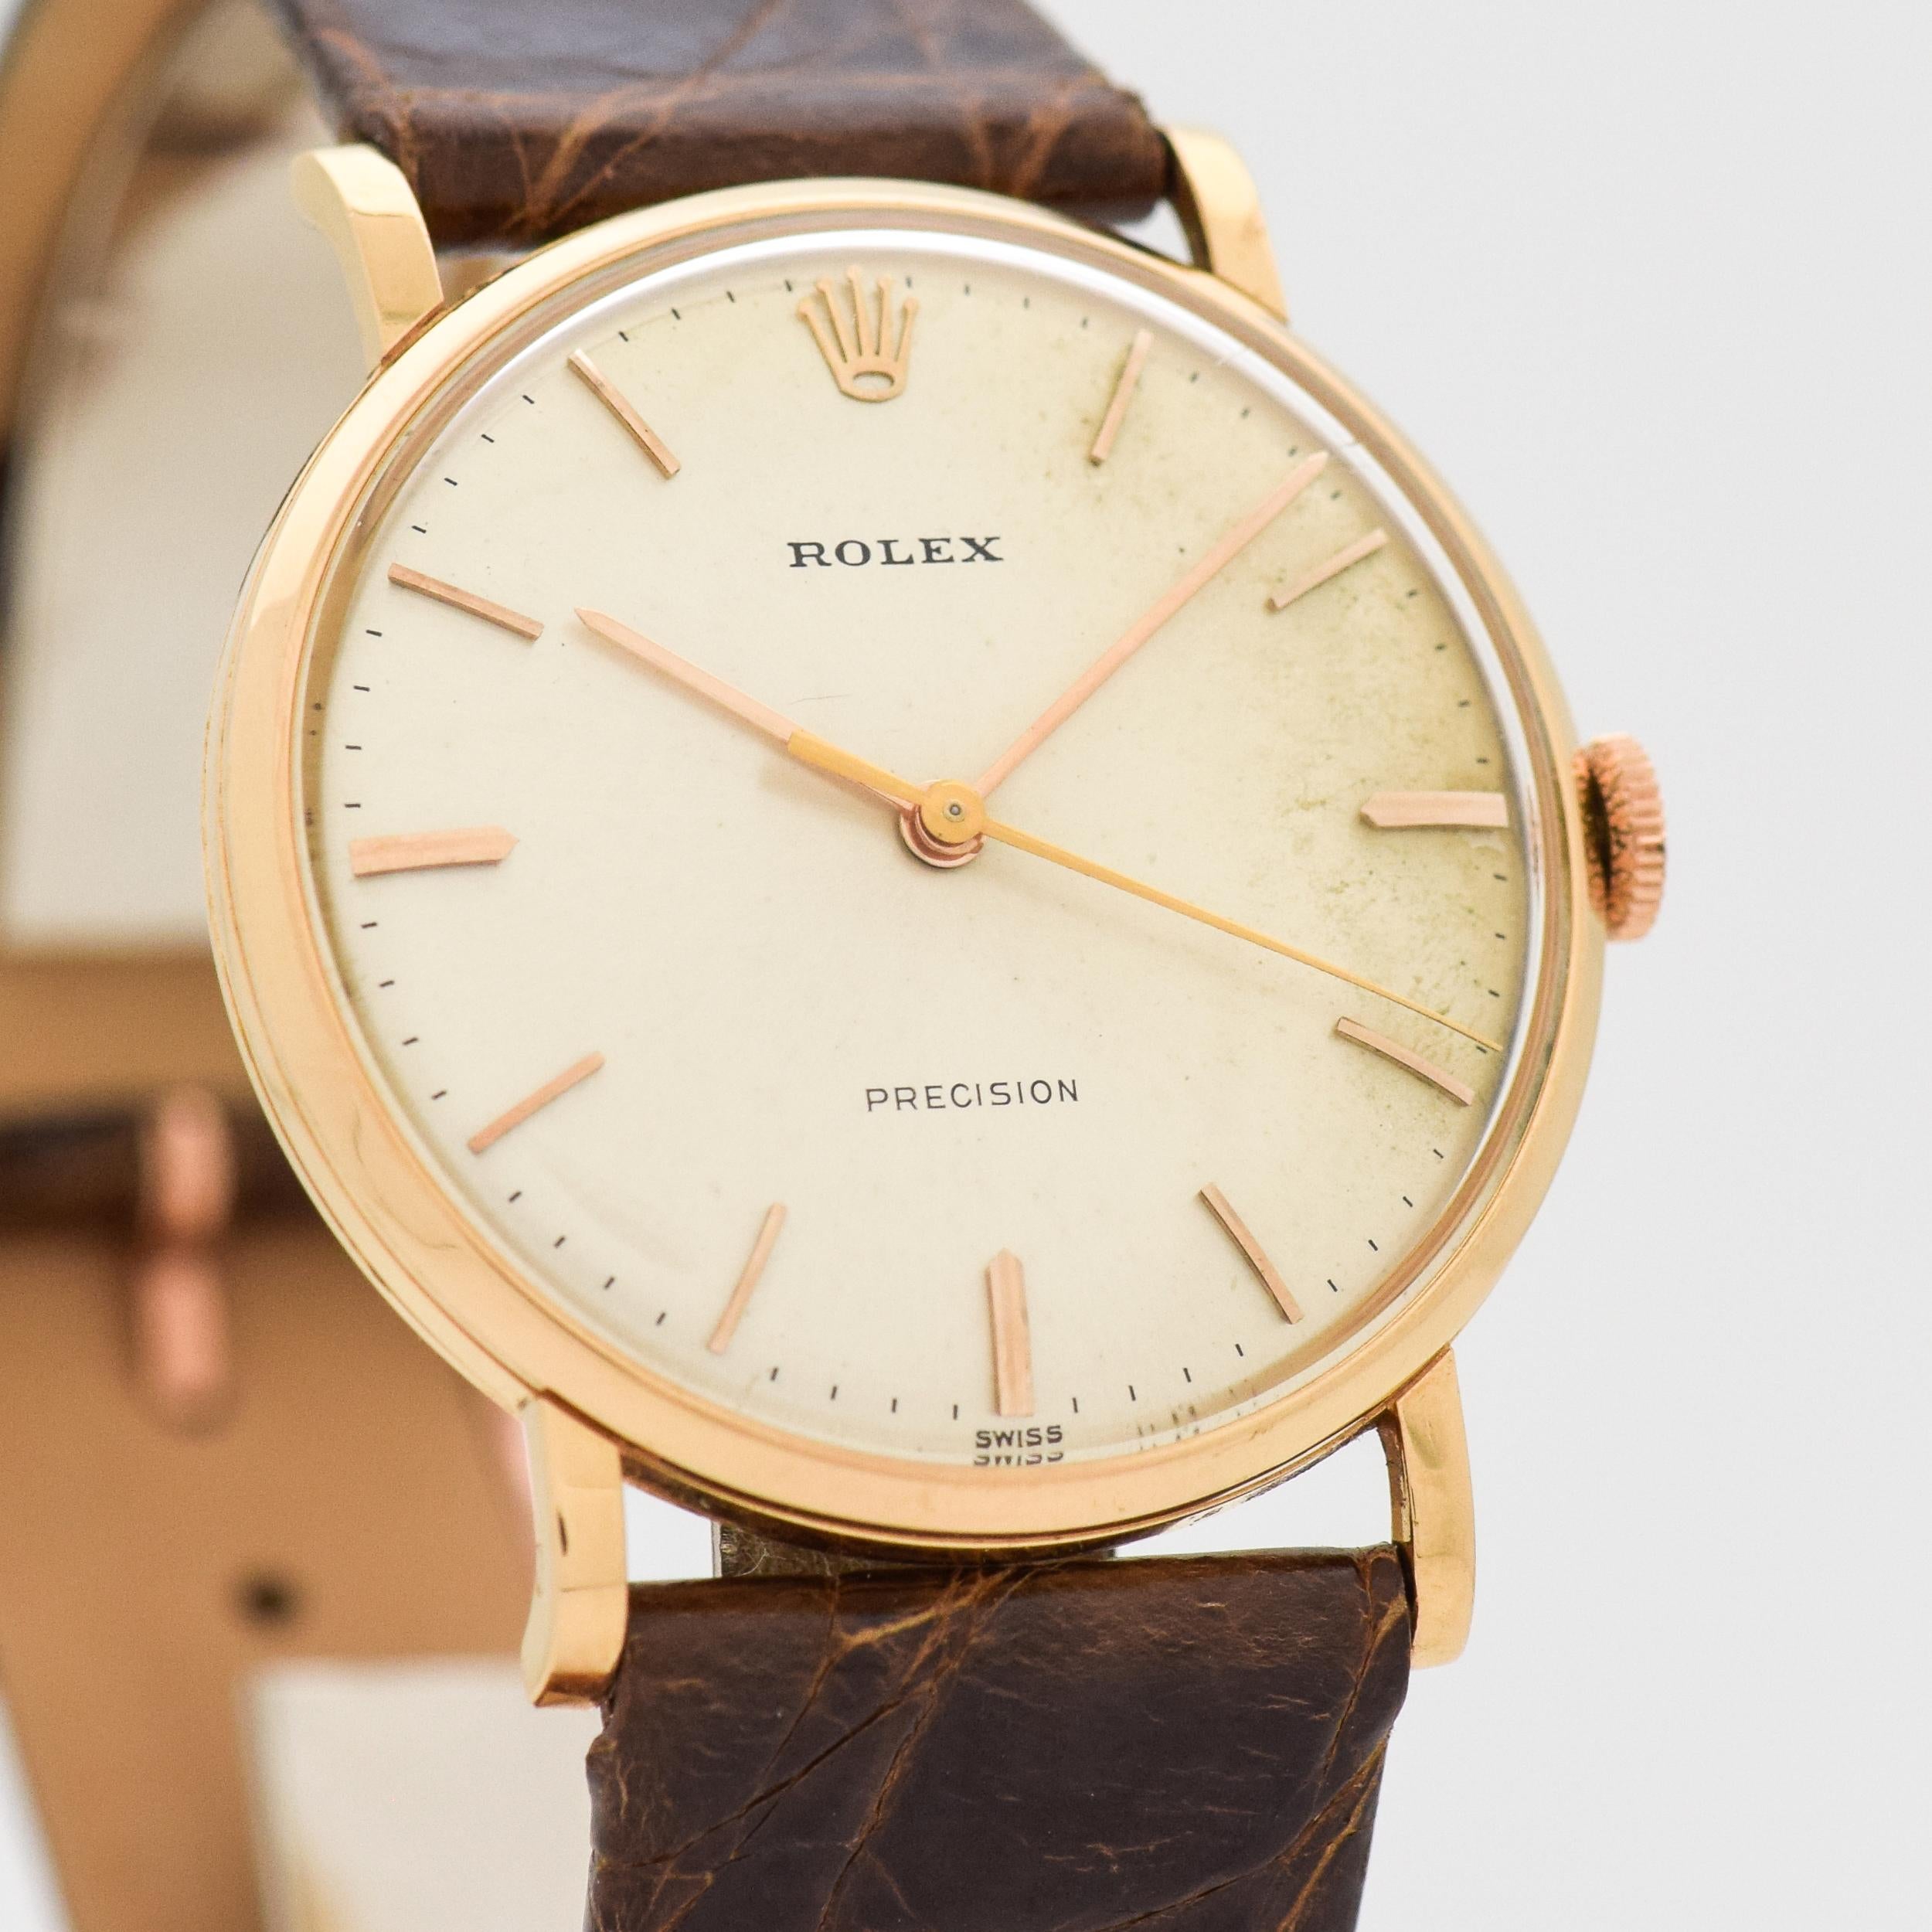 1958 Vintage Rolex Precision Ref. 9659 18k Light Rose Gold Case watch with Original Silver Dial with Applied Rose Gold Stick/Bar/Baton Markers. 33mm x 38mm lug to lug (1.3 in. x 1.5 in.) 17 jewel, automatic caliber 1215 movement. 100% Genuine